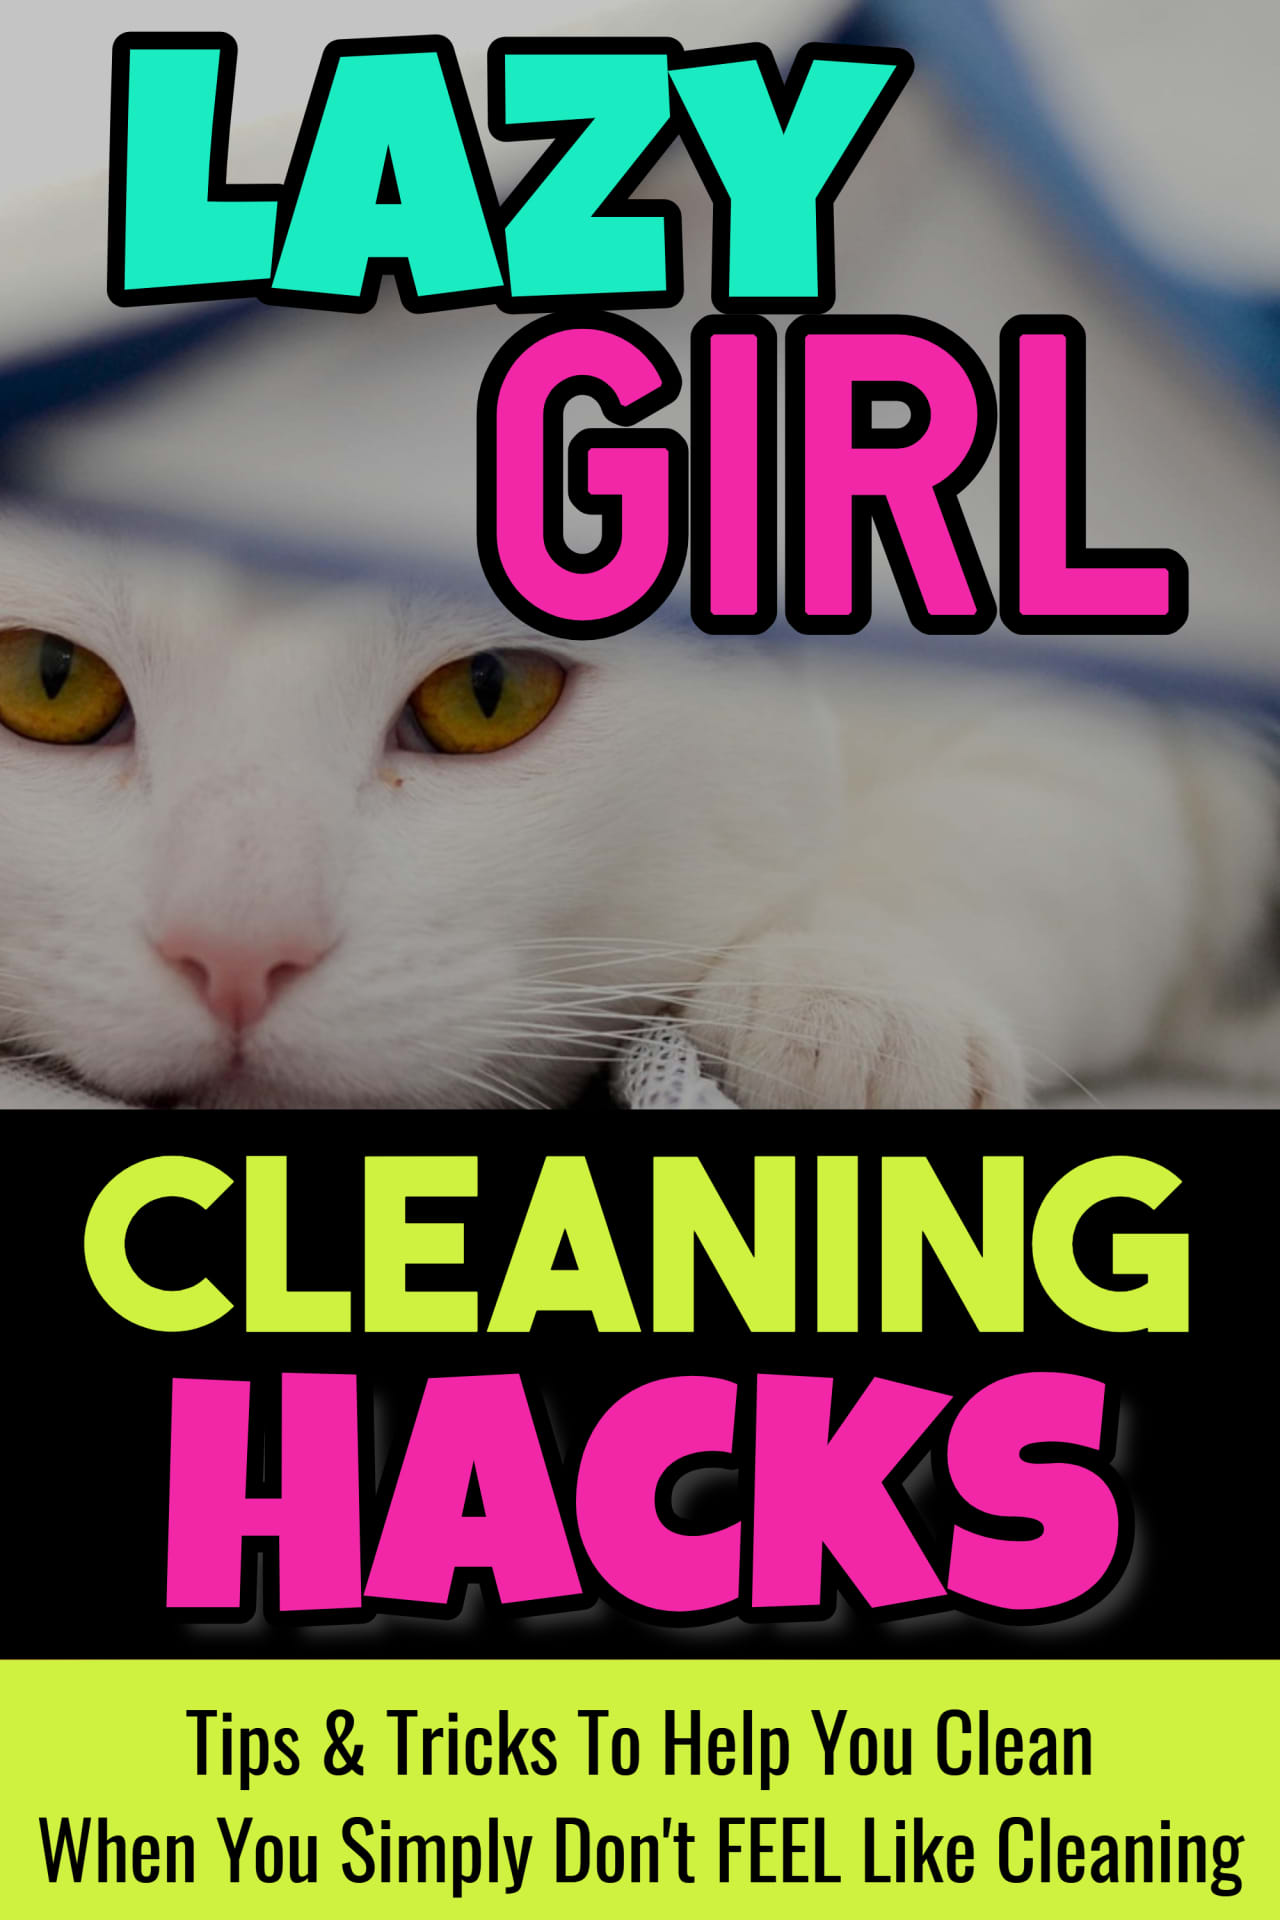 Cleaning Hacks, Cleaning Tips, Cleaning Checklists and Schedules for LAZY girls!  Can't get motivated to clean but your house is a DISASTER?  Here are some easy DIY tips and tricks (as well as some brilliant home organization hacks) to organize, declutter and CLEAN your house!